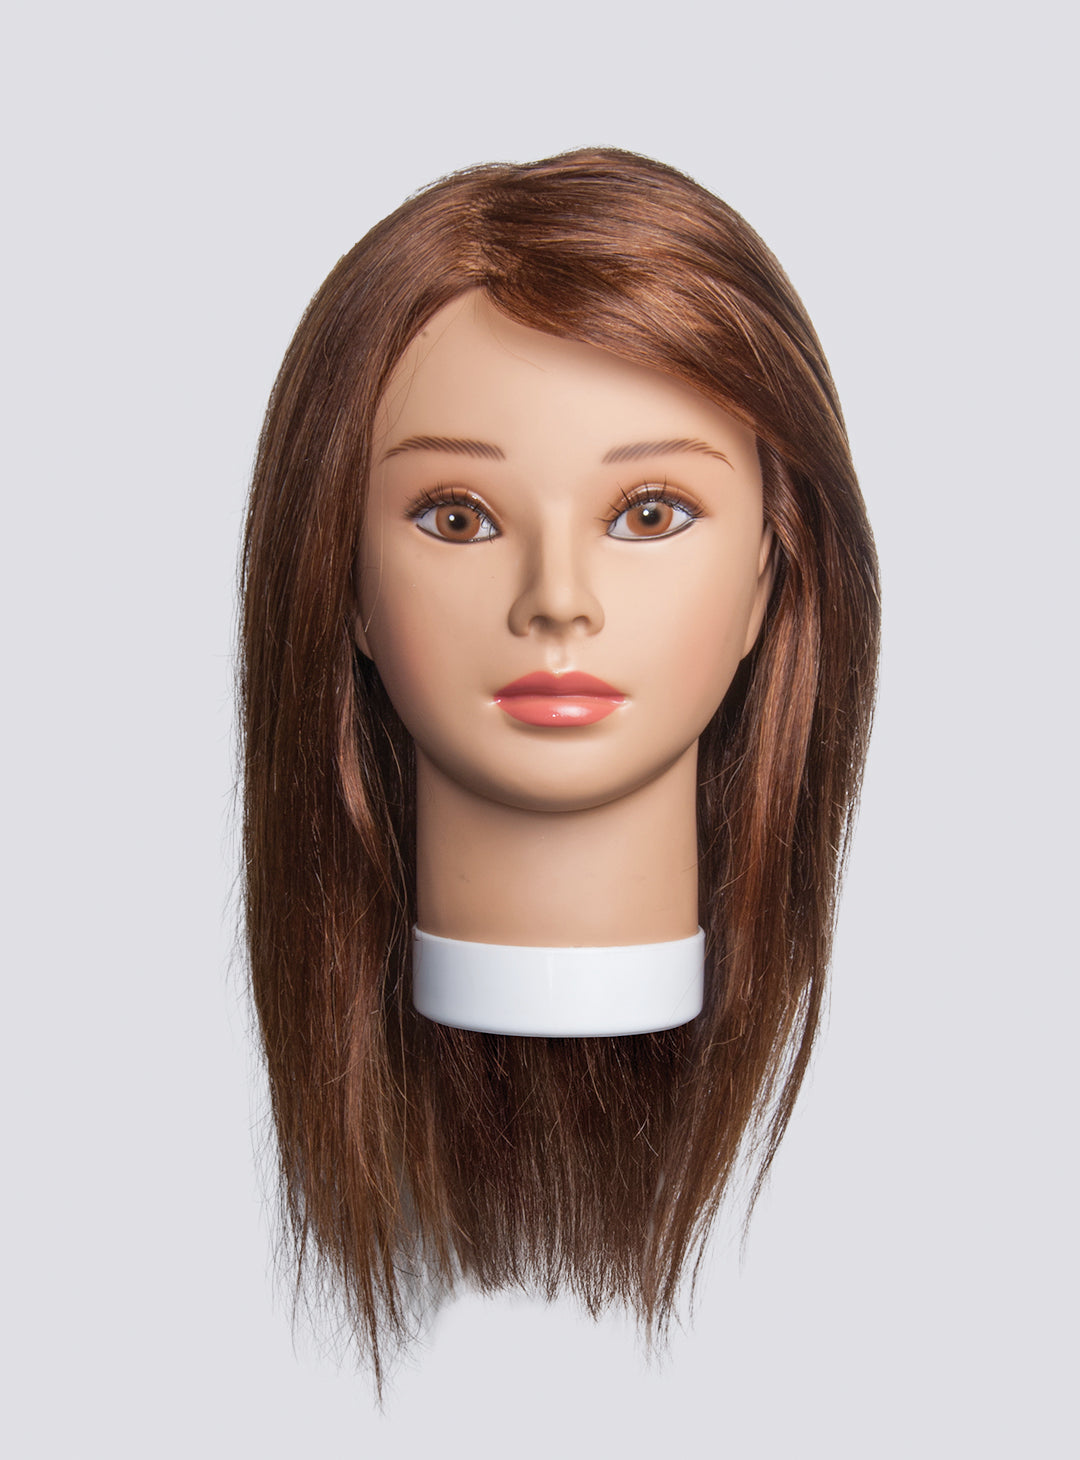  Mannequin Head With Hair